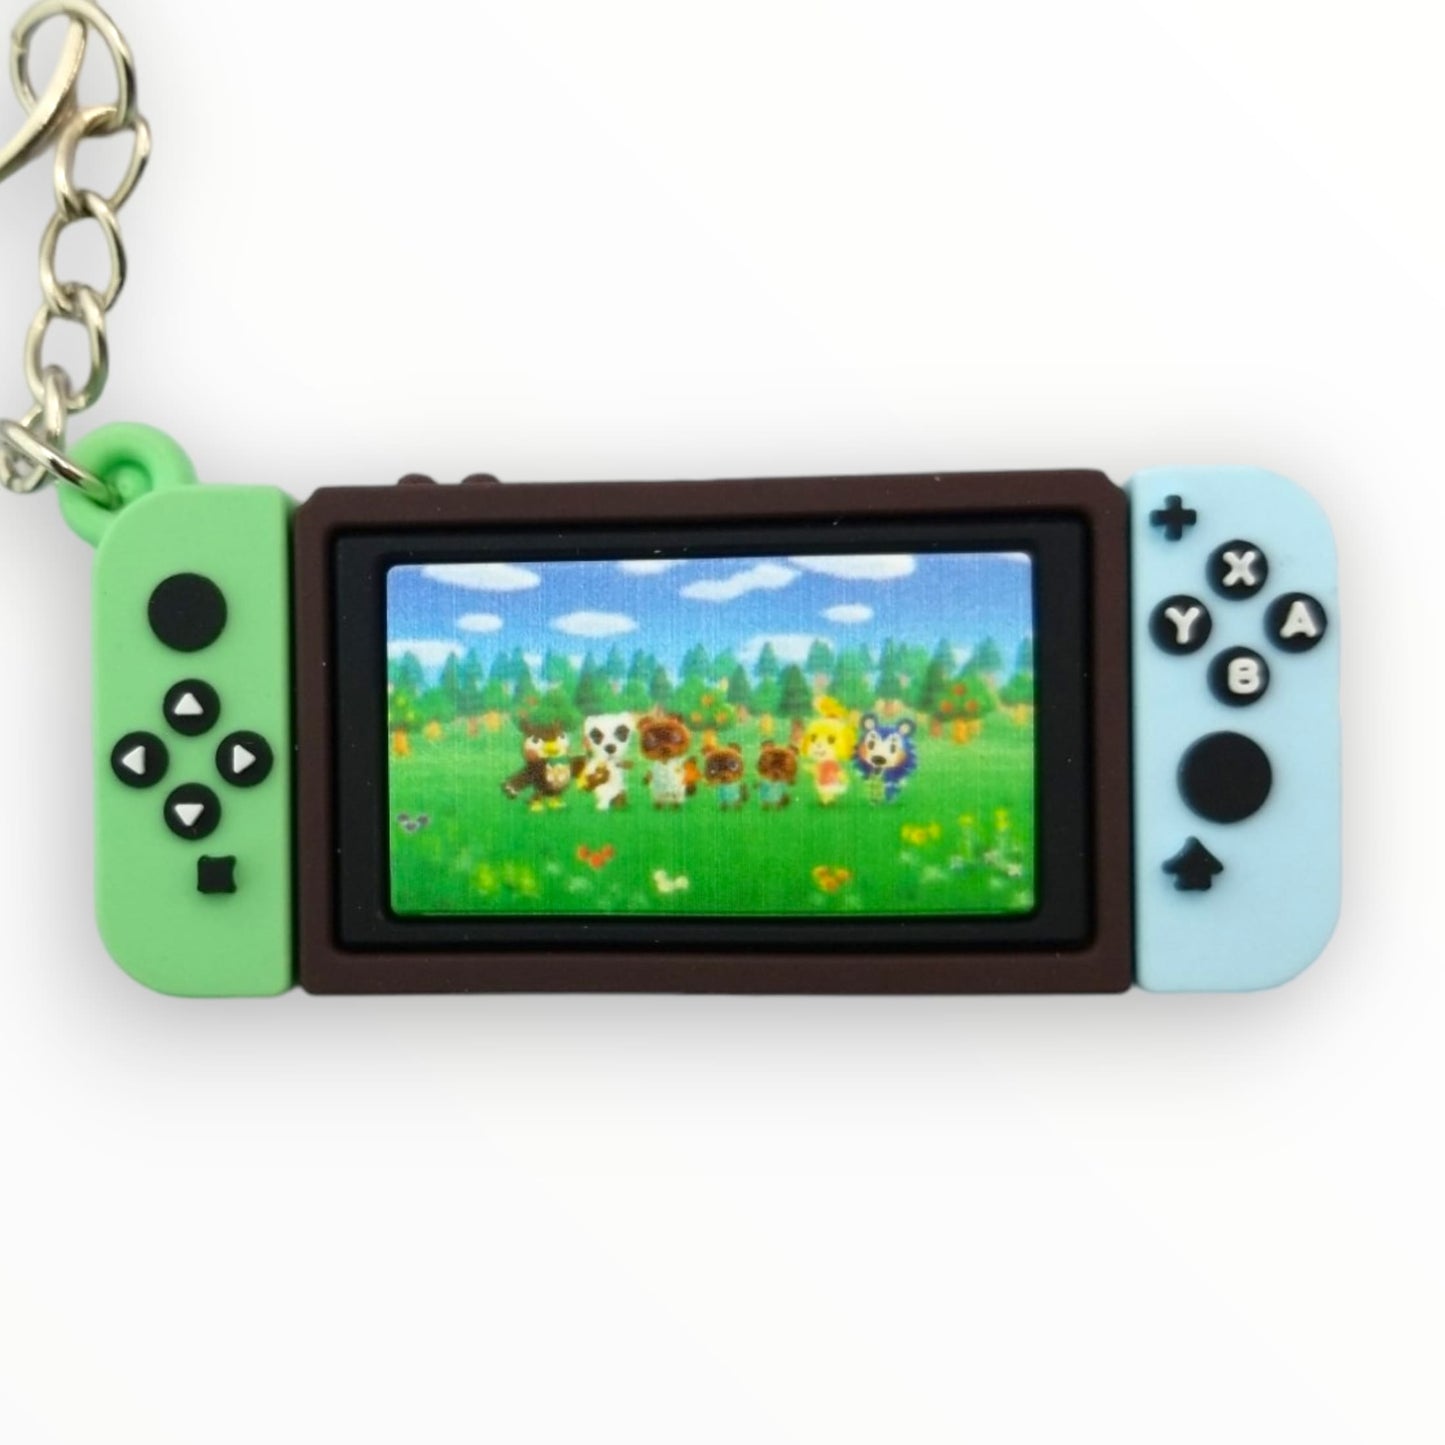 Nintendo Switch Animal Crossing Controller Replica Keychain from Confetti Kitty, Only 9.99